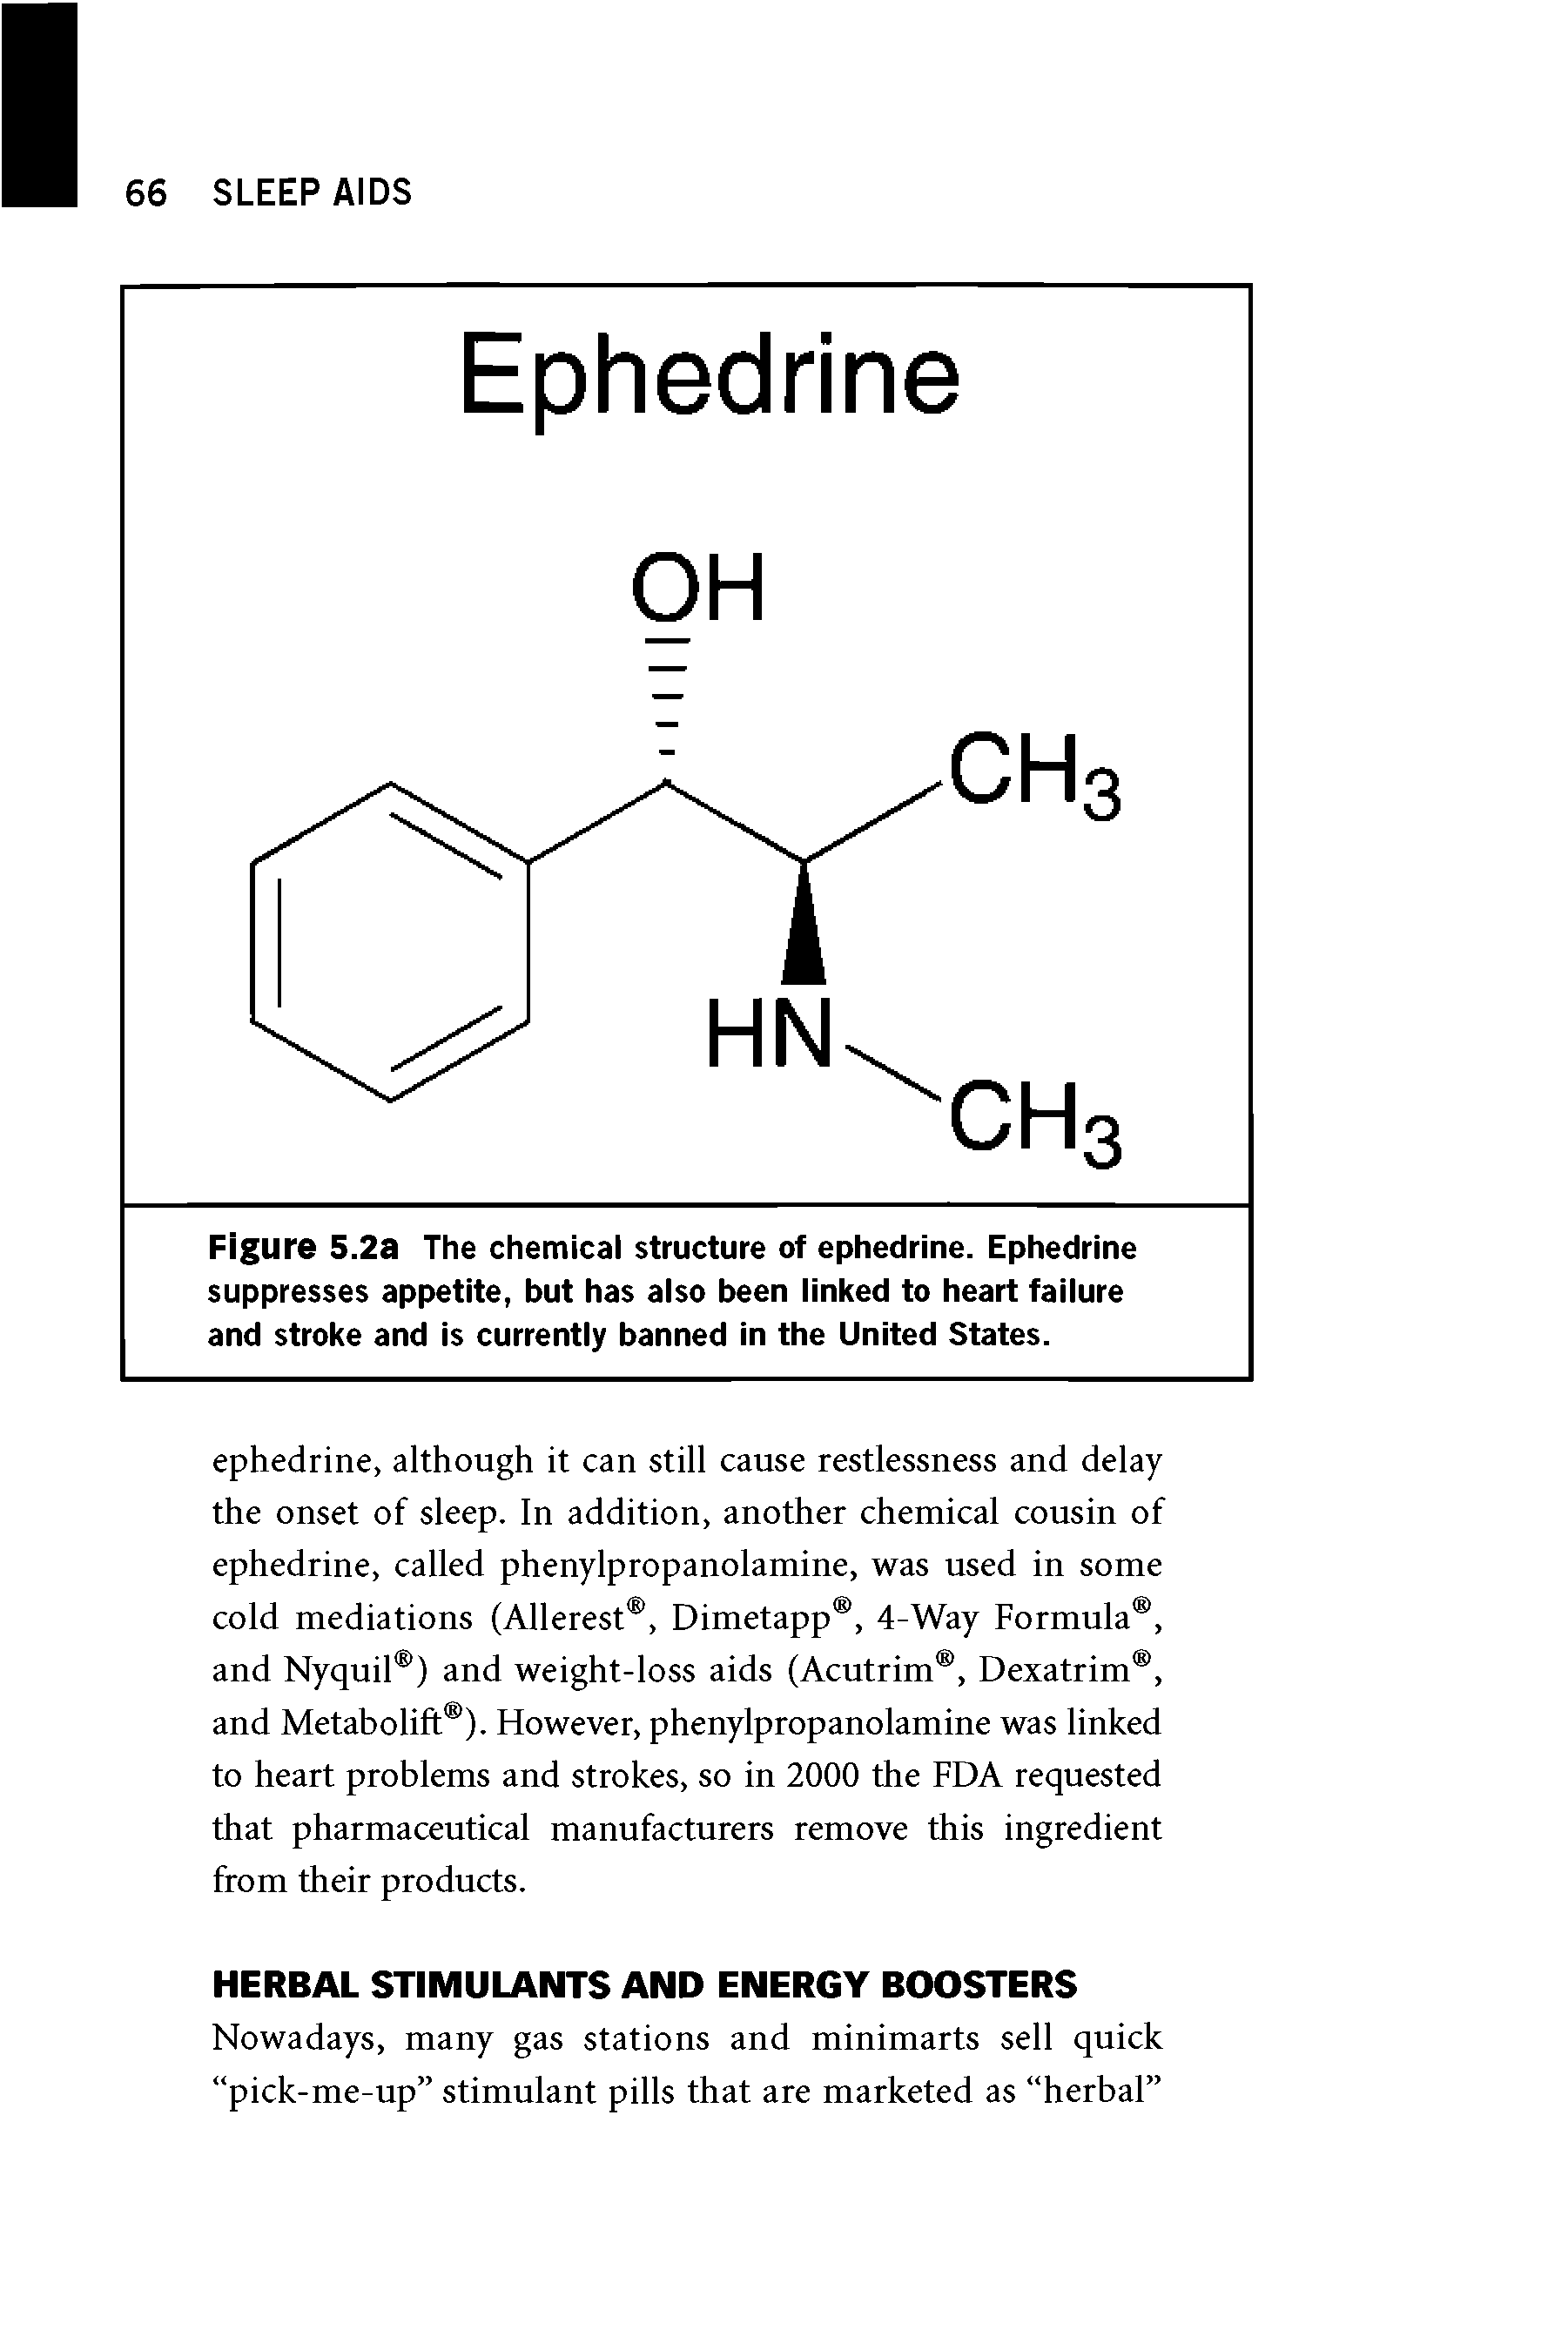 Figure 5.2a The chemical structure of ephedrine. Ephedrine suppresses appetite, but has also been linked to heart failure and stroke and is currently banned in the United States.